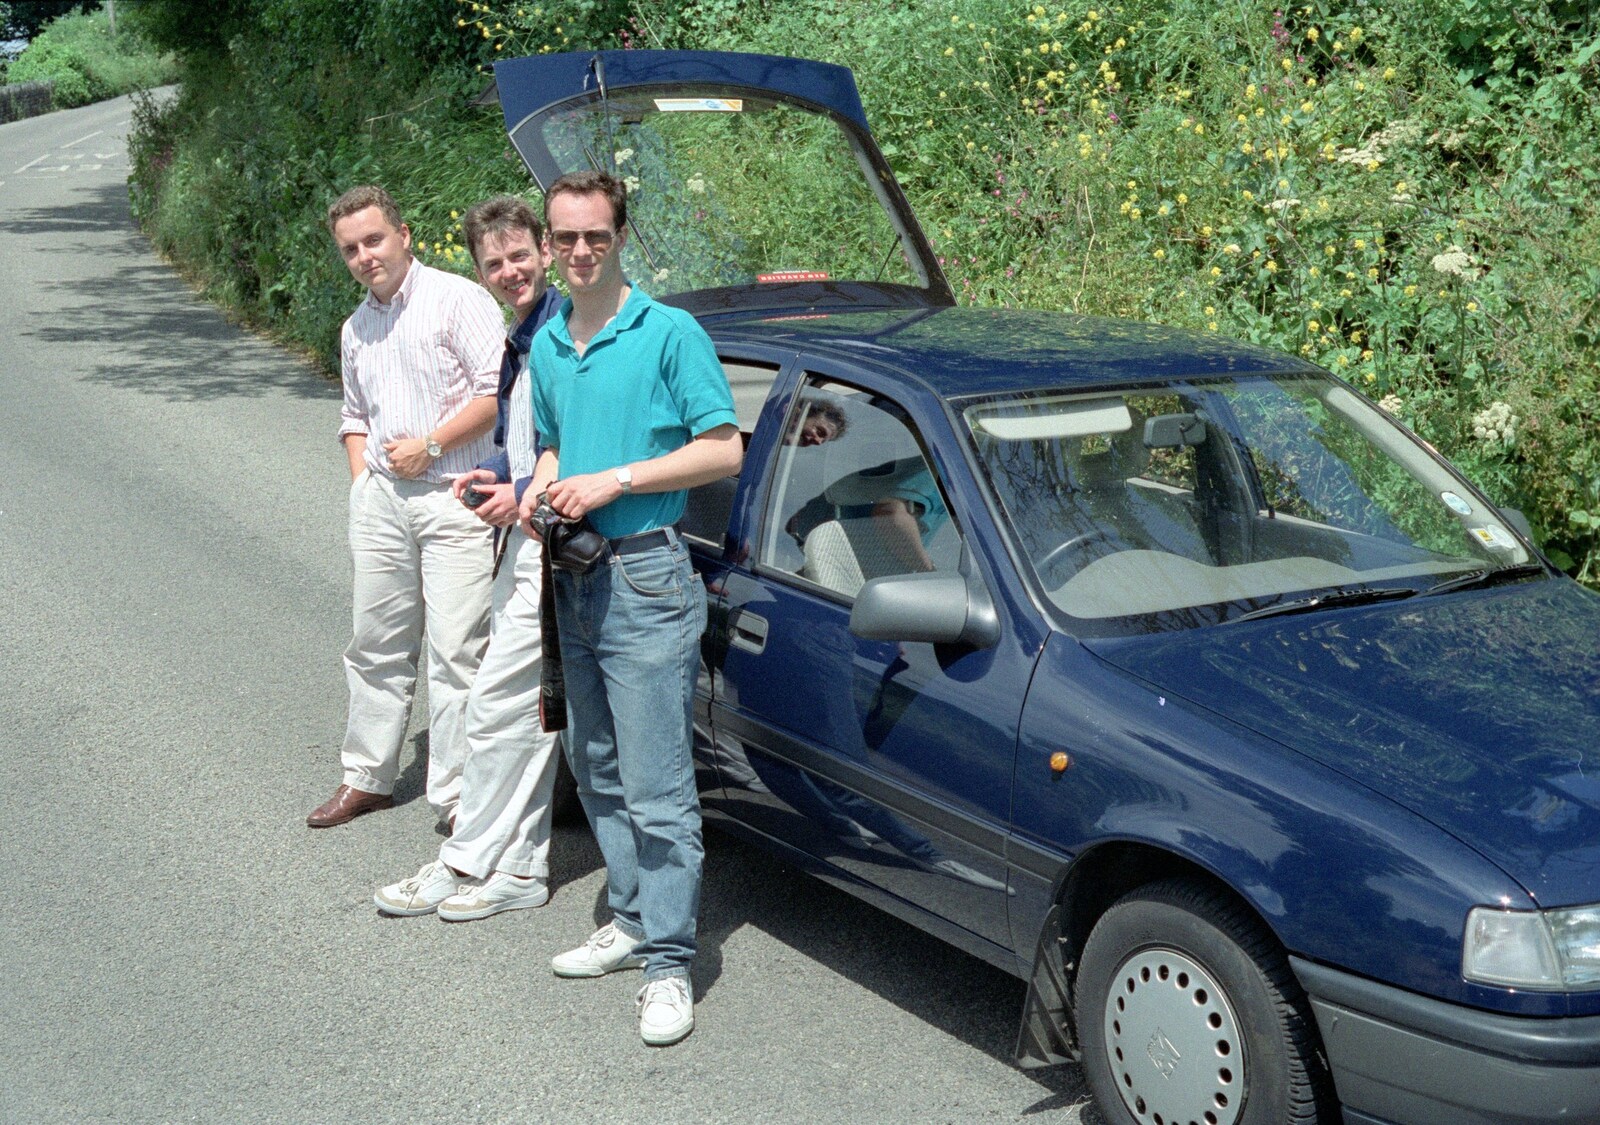 Andy, John and Chris by the car from Uni: An End-of-it-all Trip to Land's End, Cornwall - 13th June 1989